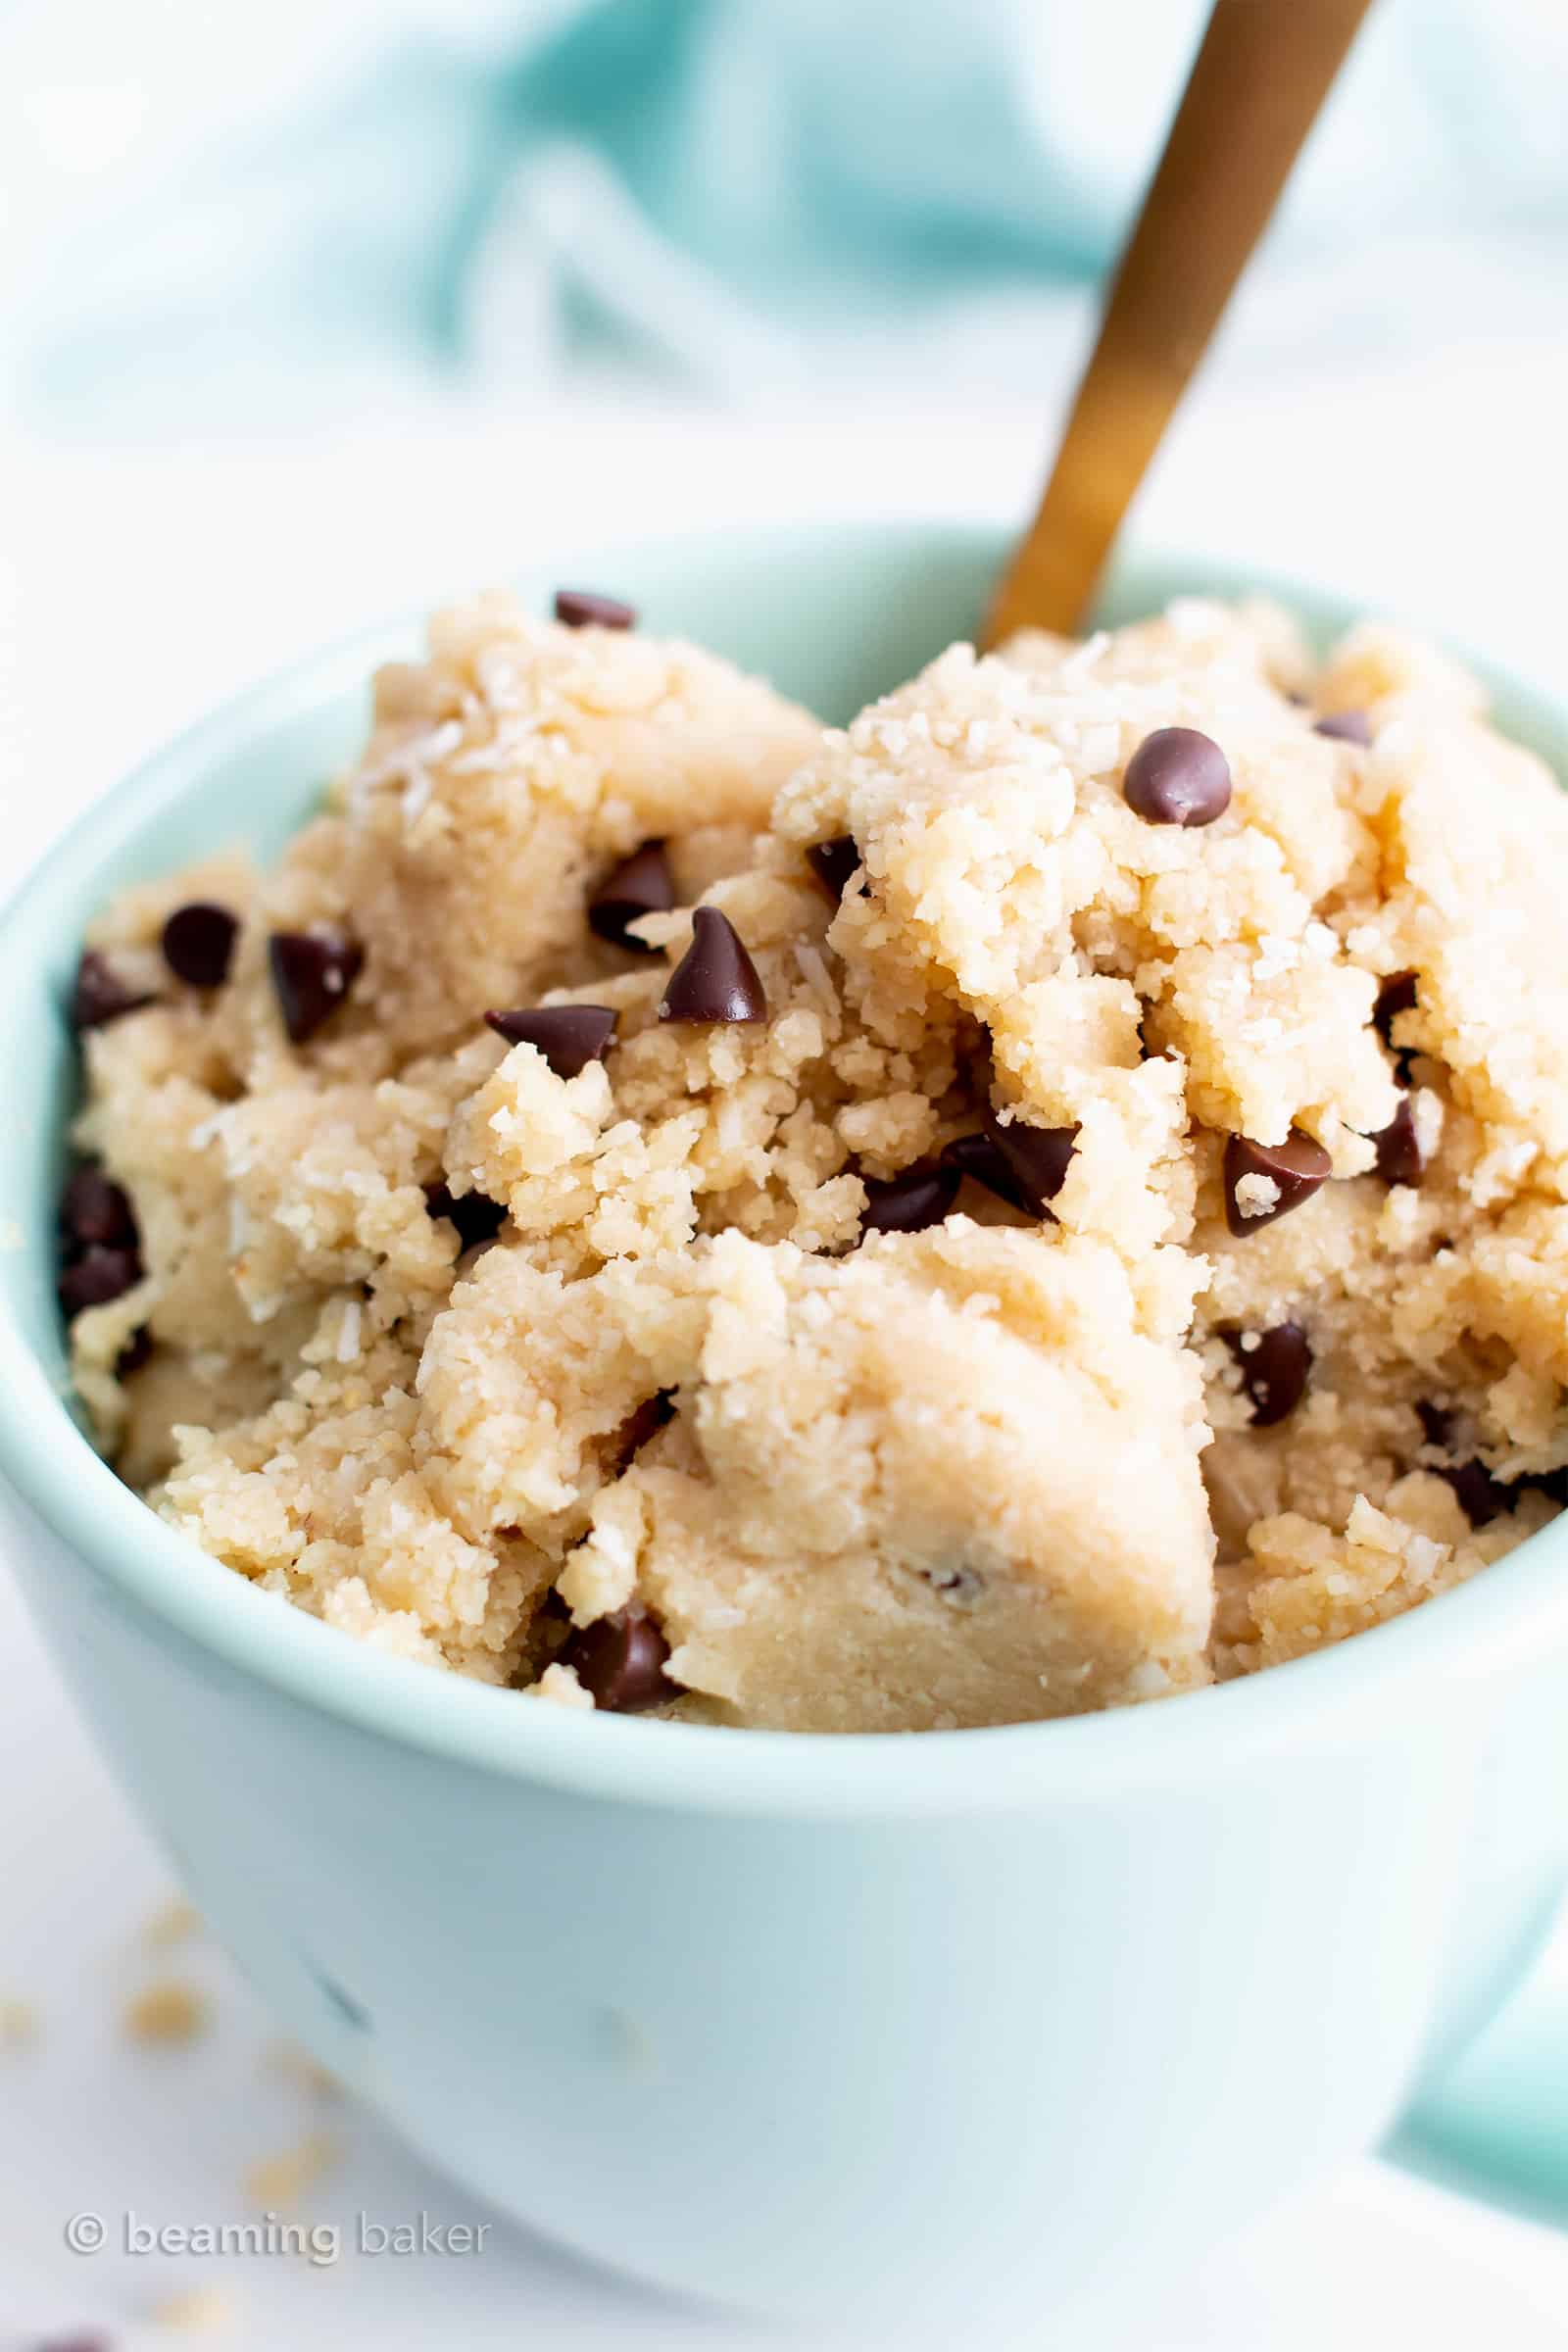 Dairy-Free Coconut Flour Cookie Dough (V, GF): this decadent paleo vegan cookie dough recipe is packed with coconut flavor! It’s the tastiest edible almond flour cookie dough treat—healthy, easy & gluten-free! #CookieDough #Paleo #Vegan #GlutenFree #ChocolateChip | Recipe at BeamingBaker.com